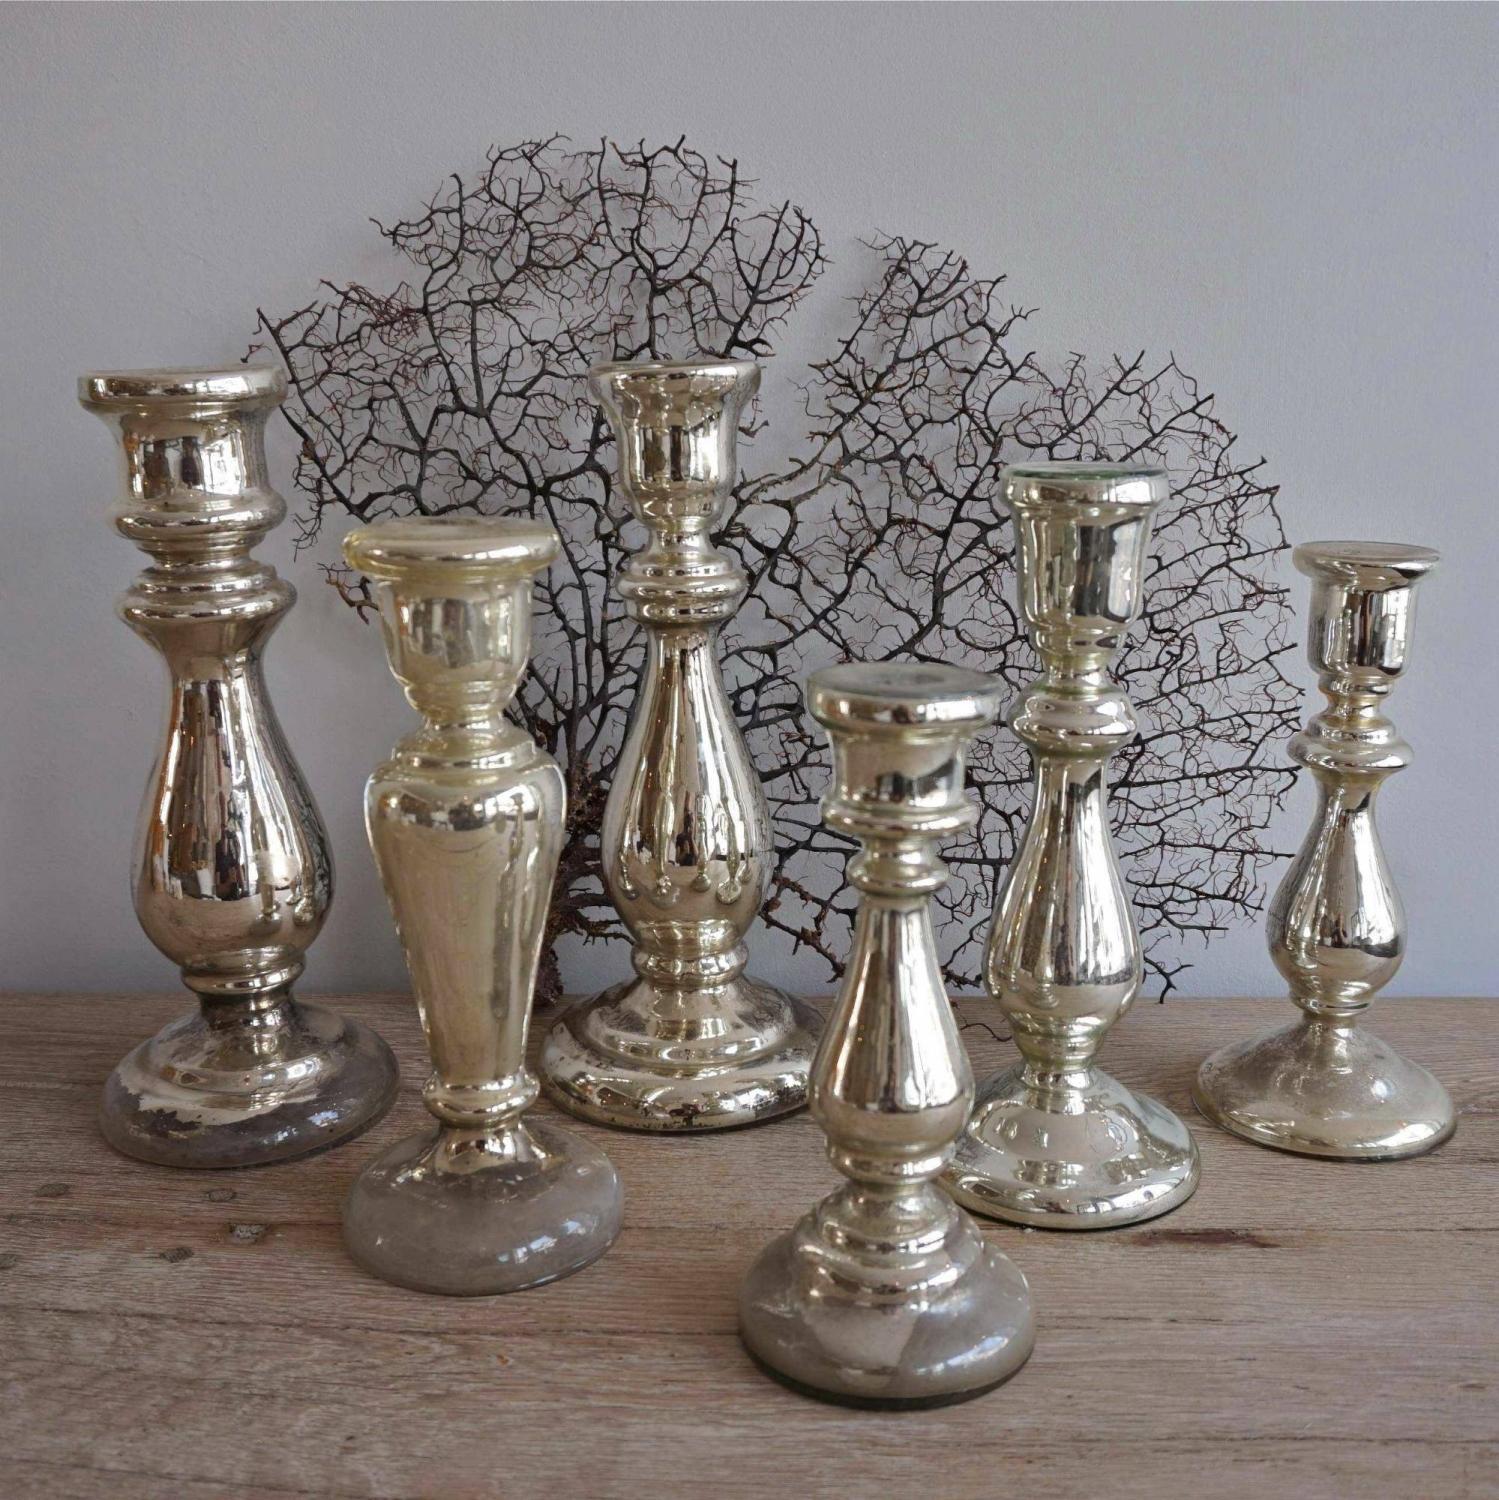 COLLECTION OF ANTIQUE MERCURY GLASS CANDLESTICKS